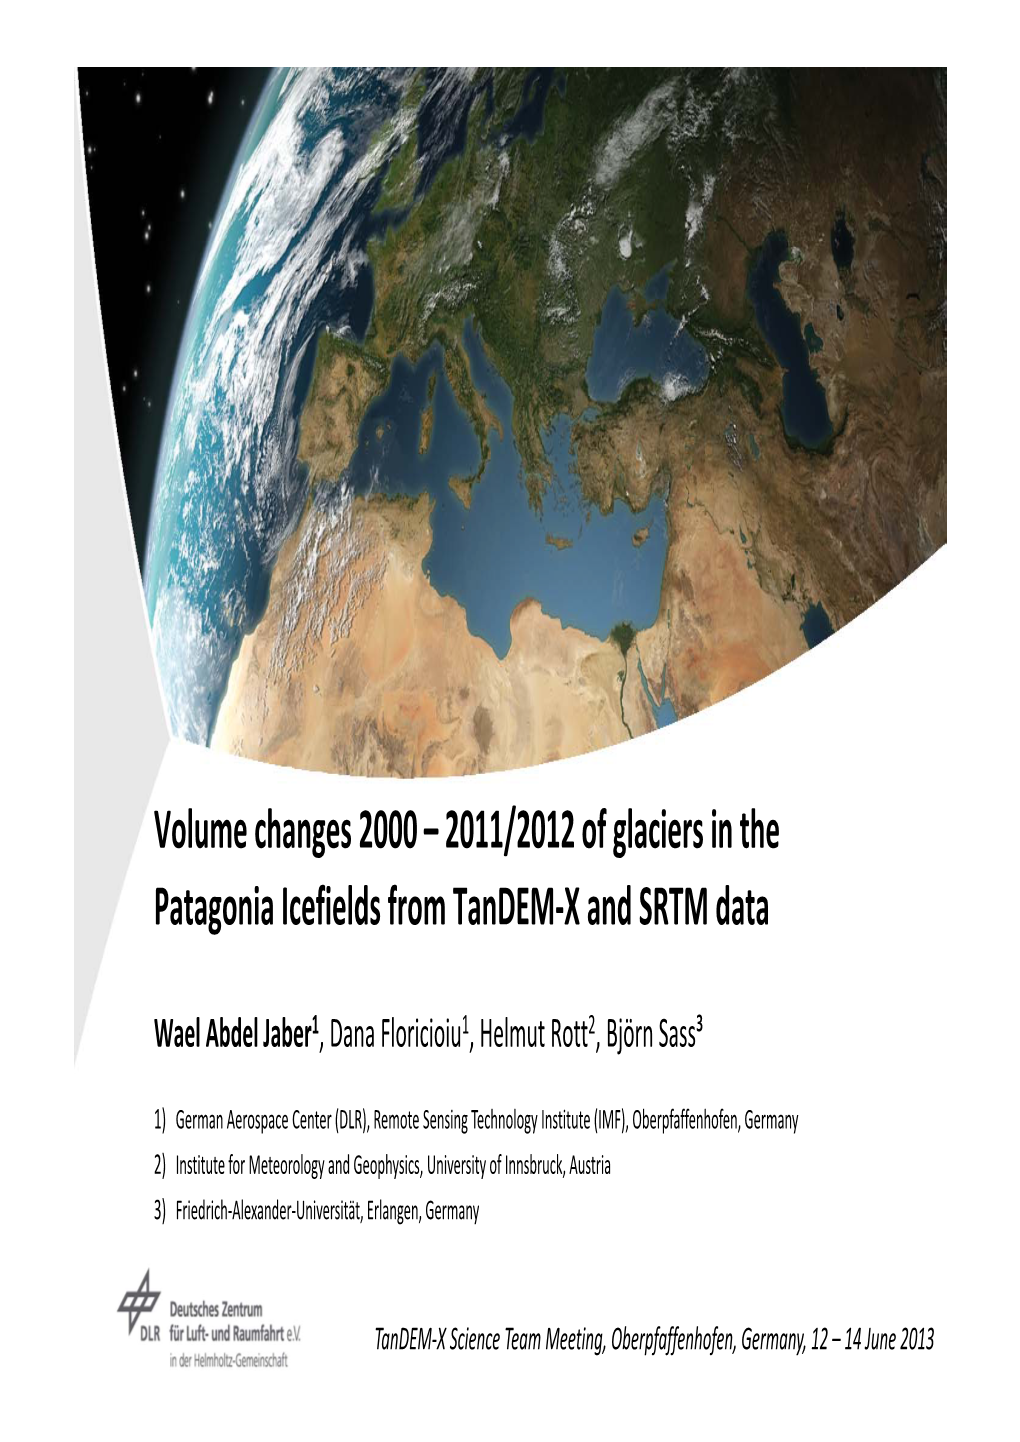 Volume Changes 2000 – 2011/2012 of Glaciers in the Patagonia Icefields from Tandem‐X and SRTM Data